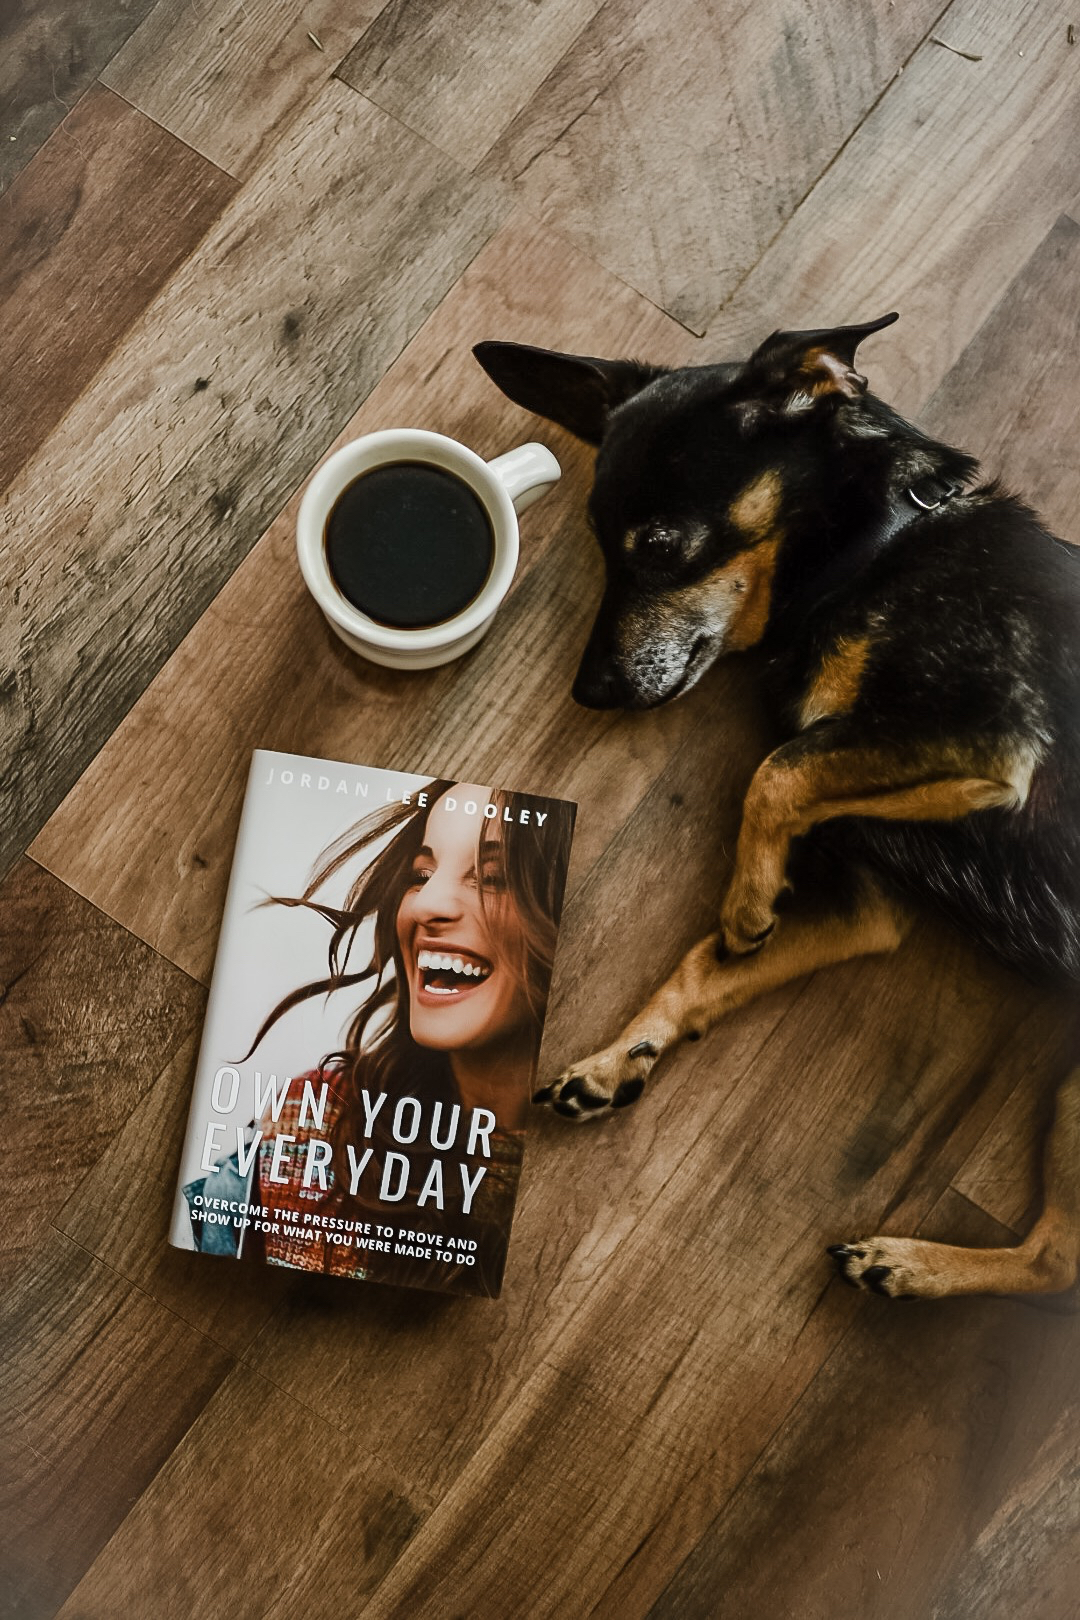 review of own your everyday by jordan lee dooley